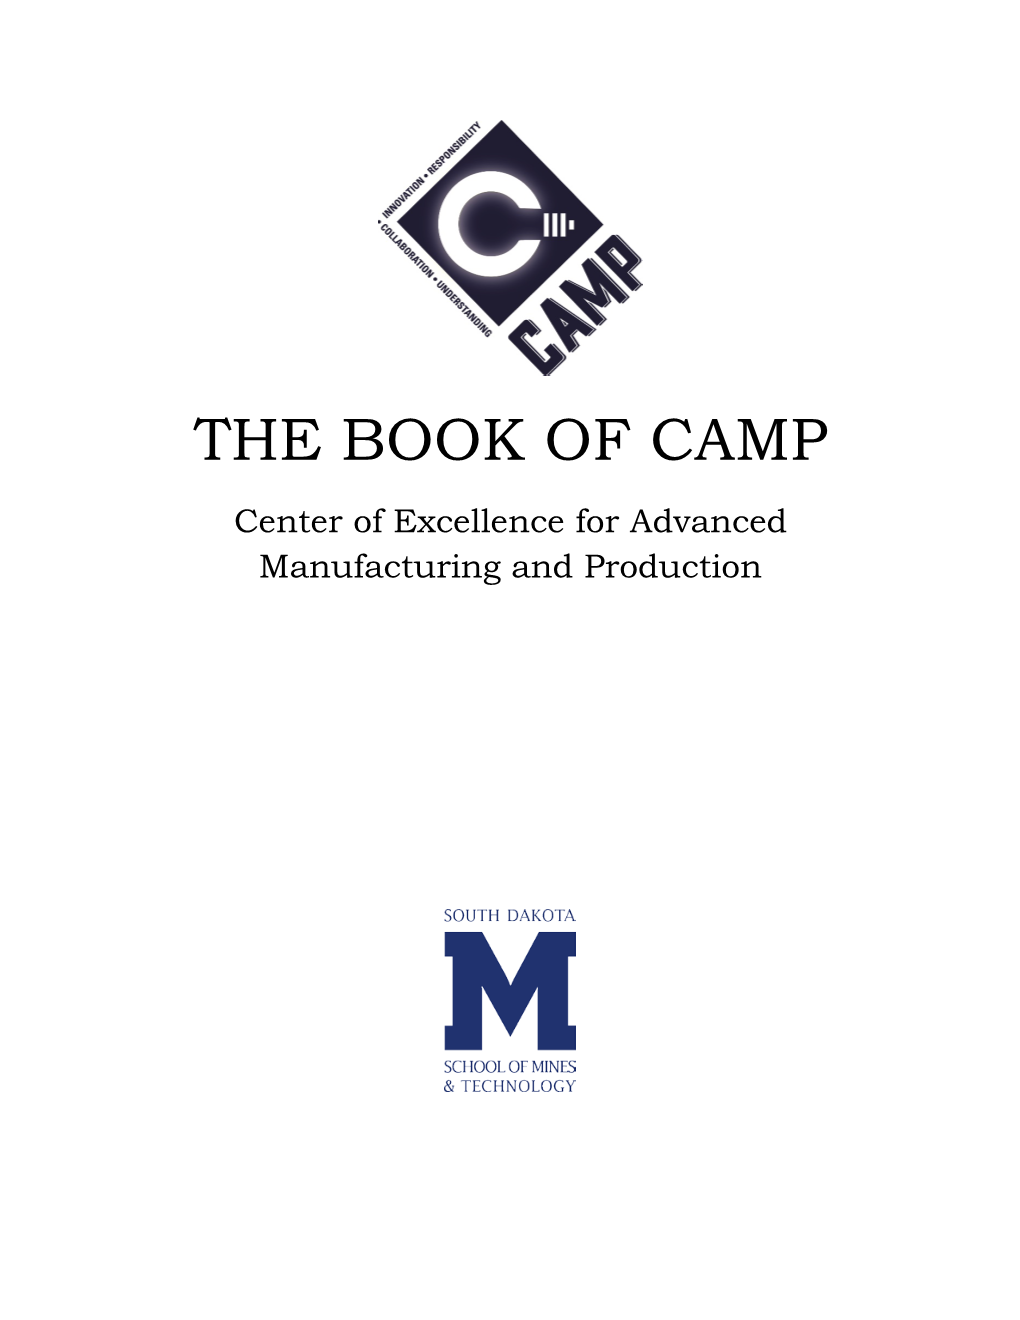 THE BOOK of CAMP Center of Excellence for Advanced Manufacturing and Production the HANDBOOK of CAMP